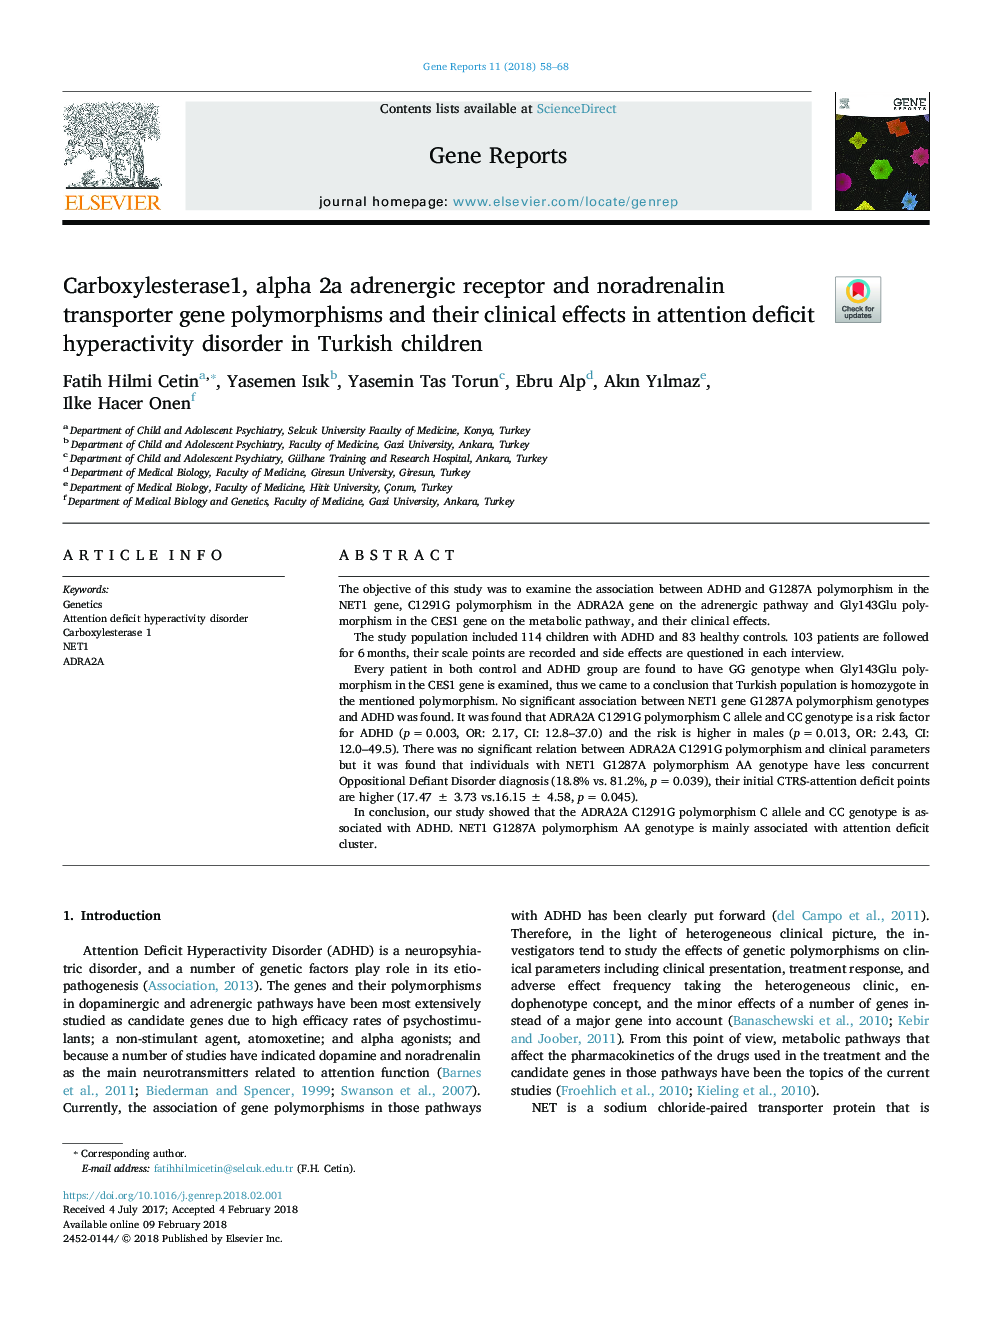 Carboxylesterase1, alpha 2a adrenergic receptor and noradrenalin transporter gene polymorphisms and their clinical effects in attention deficit hyperactivity disorder in Turkish children